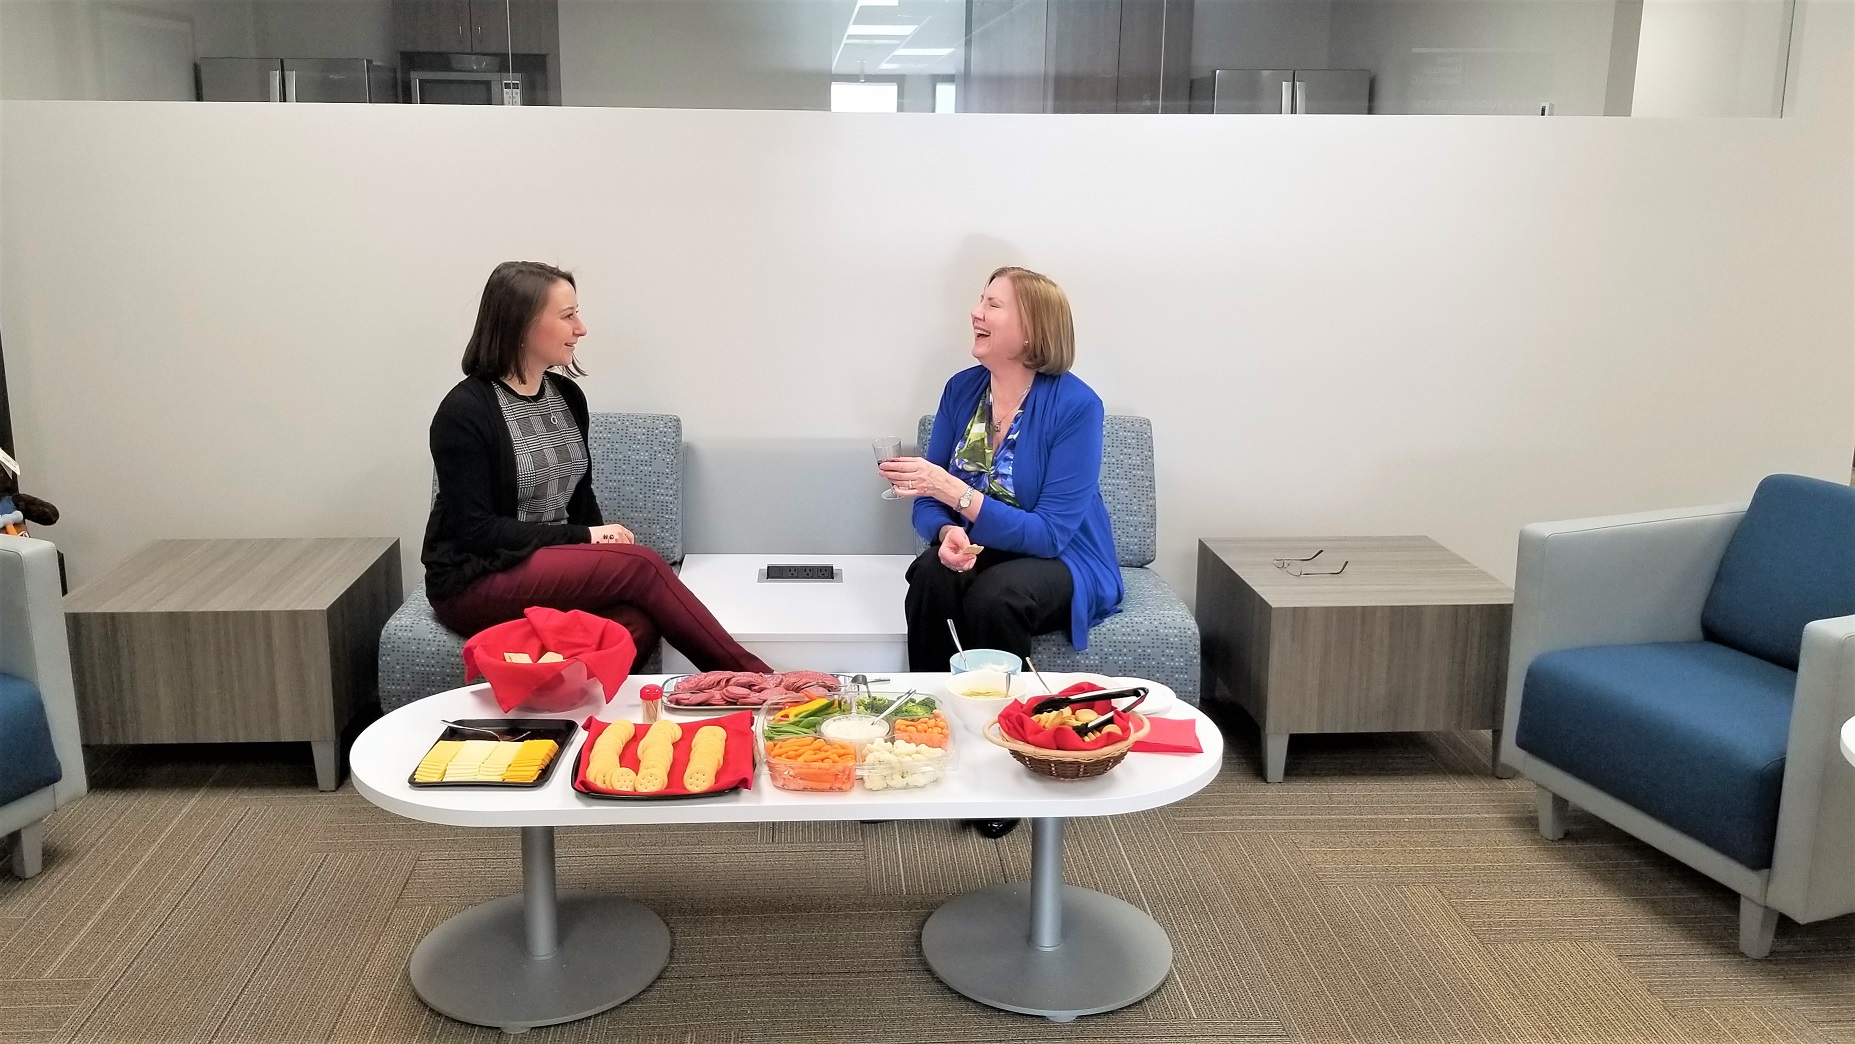 Dawn Benchelt and Anna Kuta enjoy the new IMC updated community space. Renovations were completed to the team’s space early this year, featuring a new kitchen, open-floor plan, new collaboration rooms, and a new conference room. 